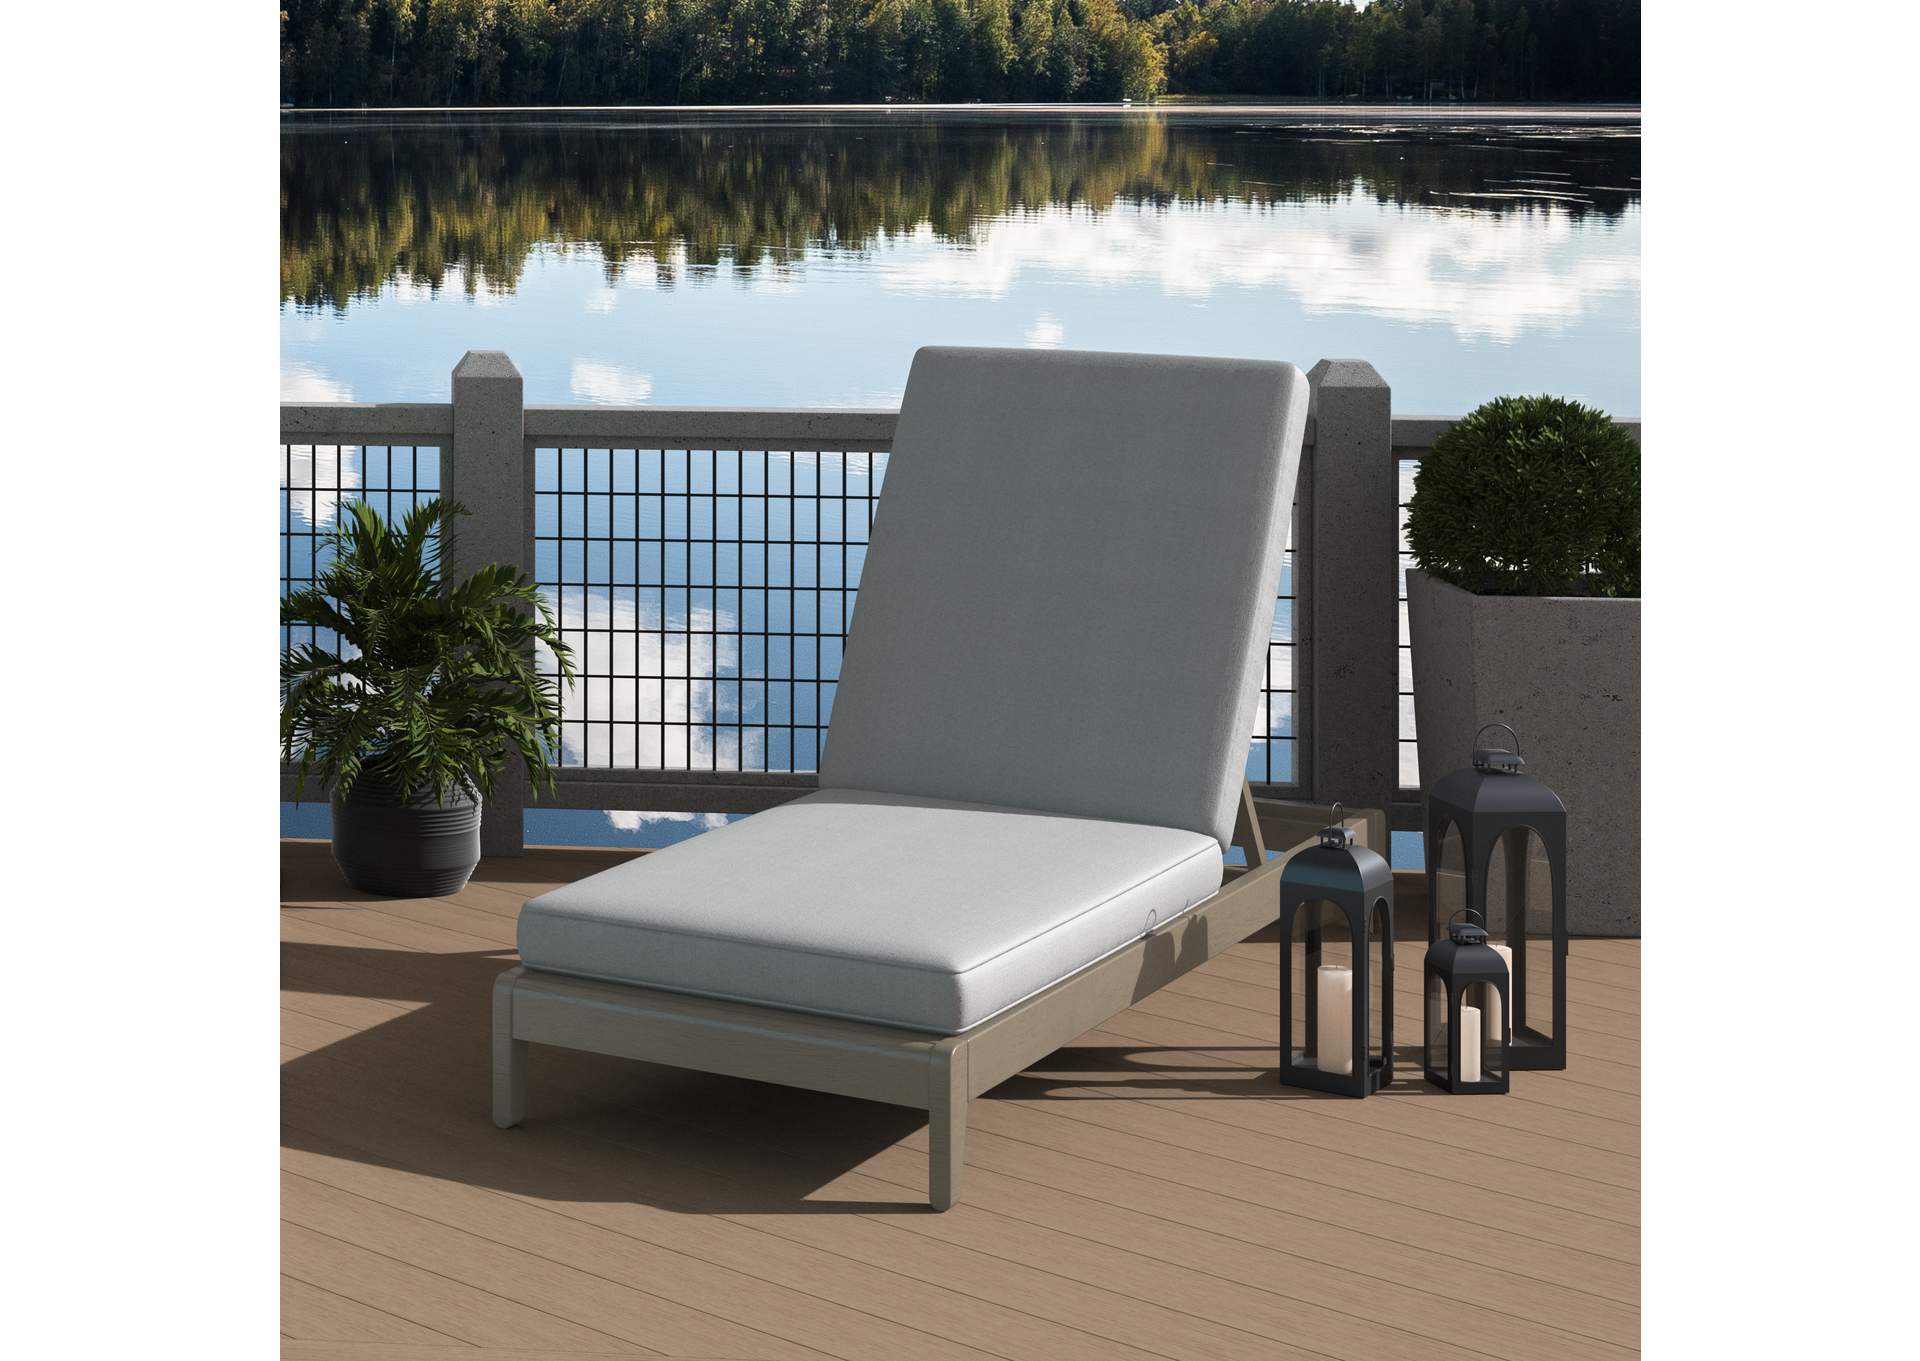 Sustain Outdoor Chaise Lounge By Homestyles,Homestyles